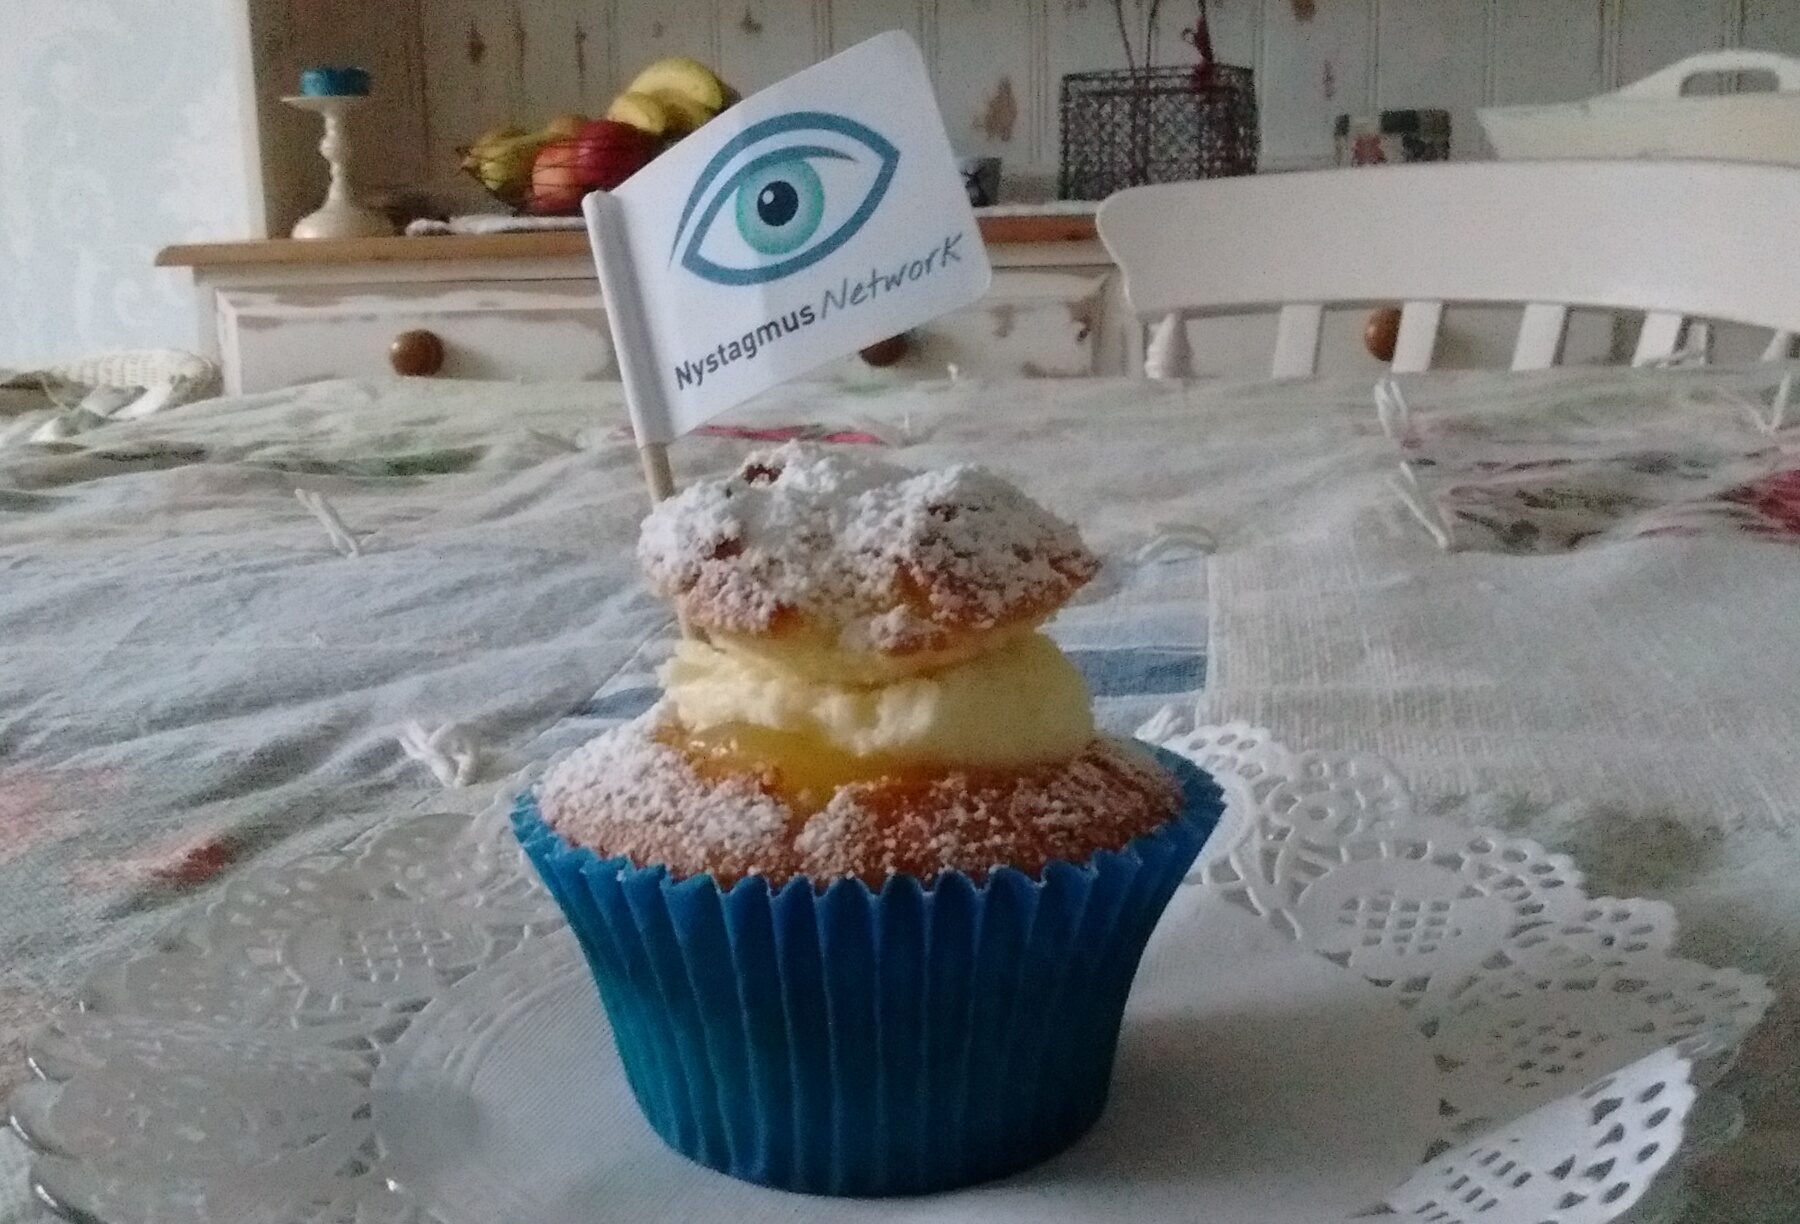 A cup cake with a paper flag bearing the Nystagmus Network logo.